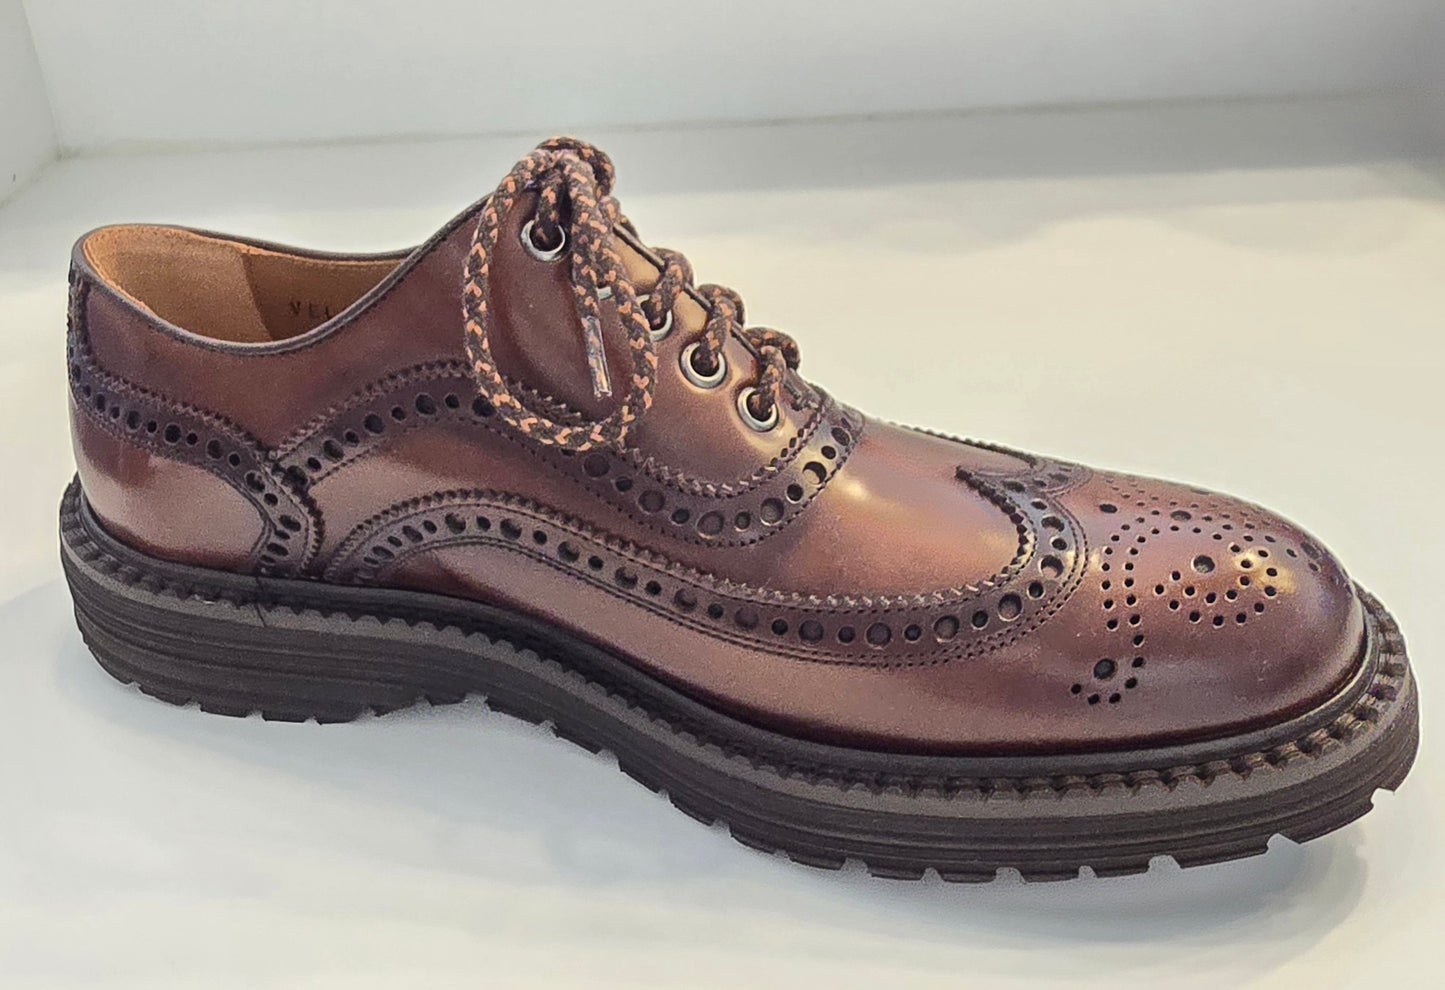 Calce Leather Shoes - Oxford Brogue Nappa Leather Brown